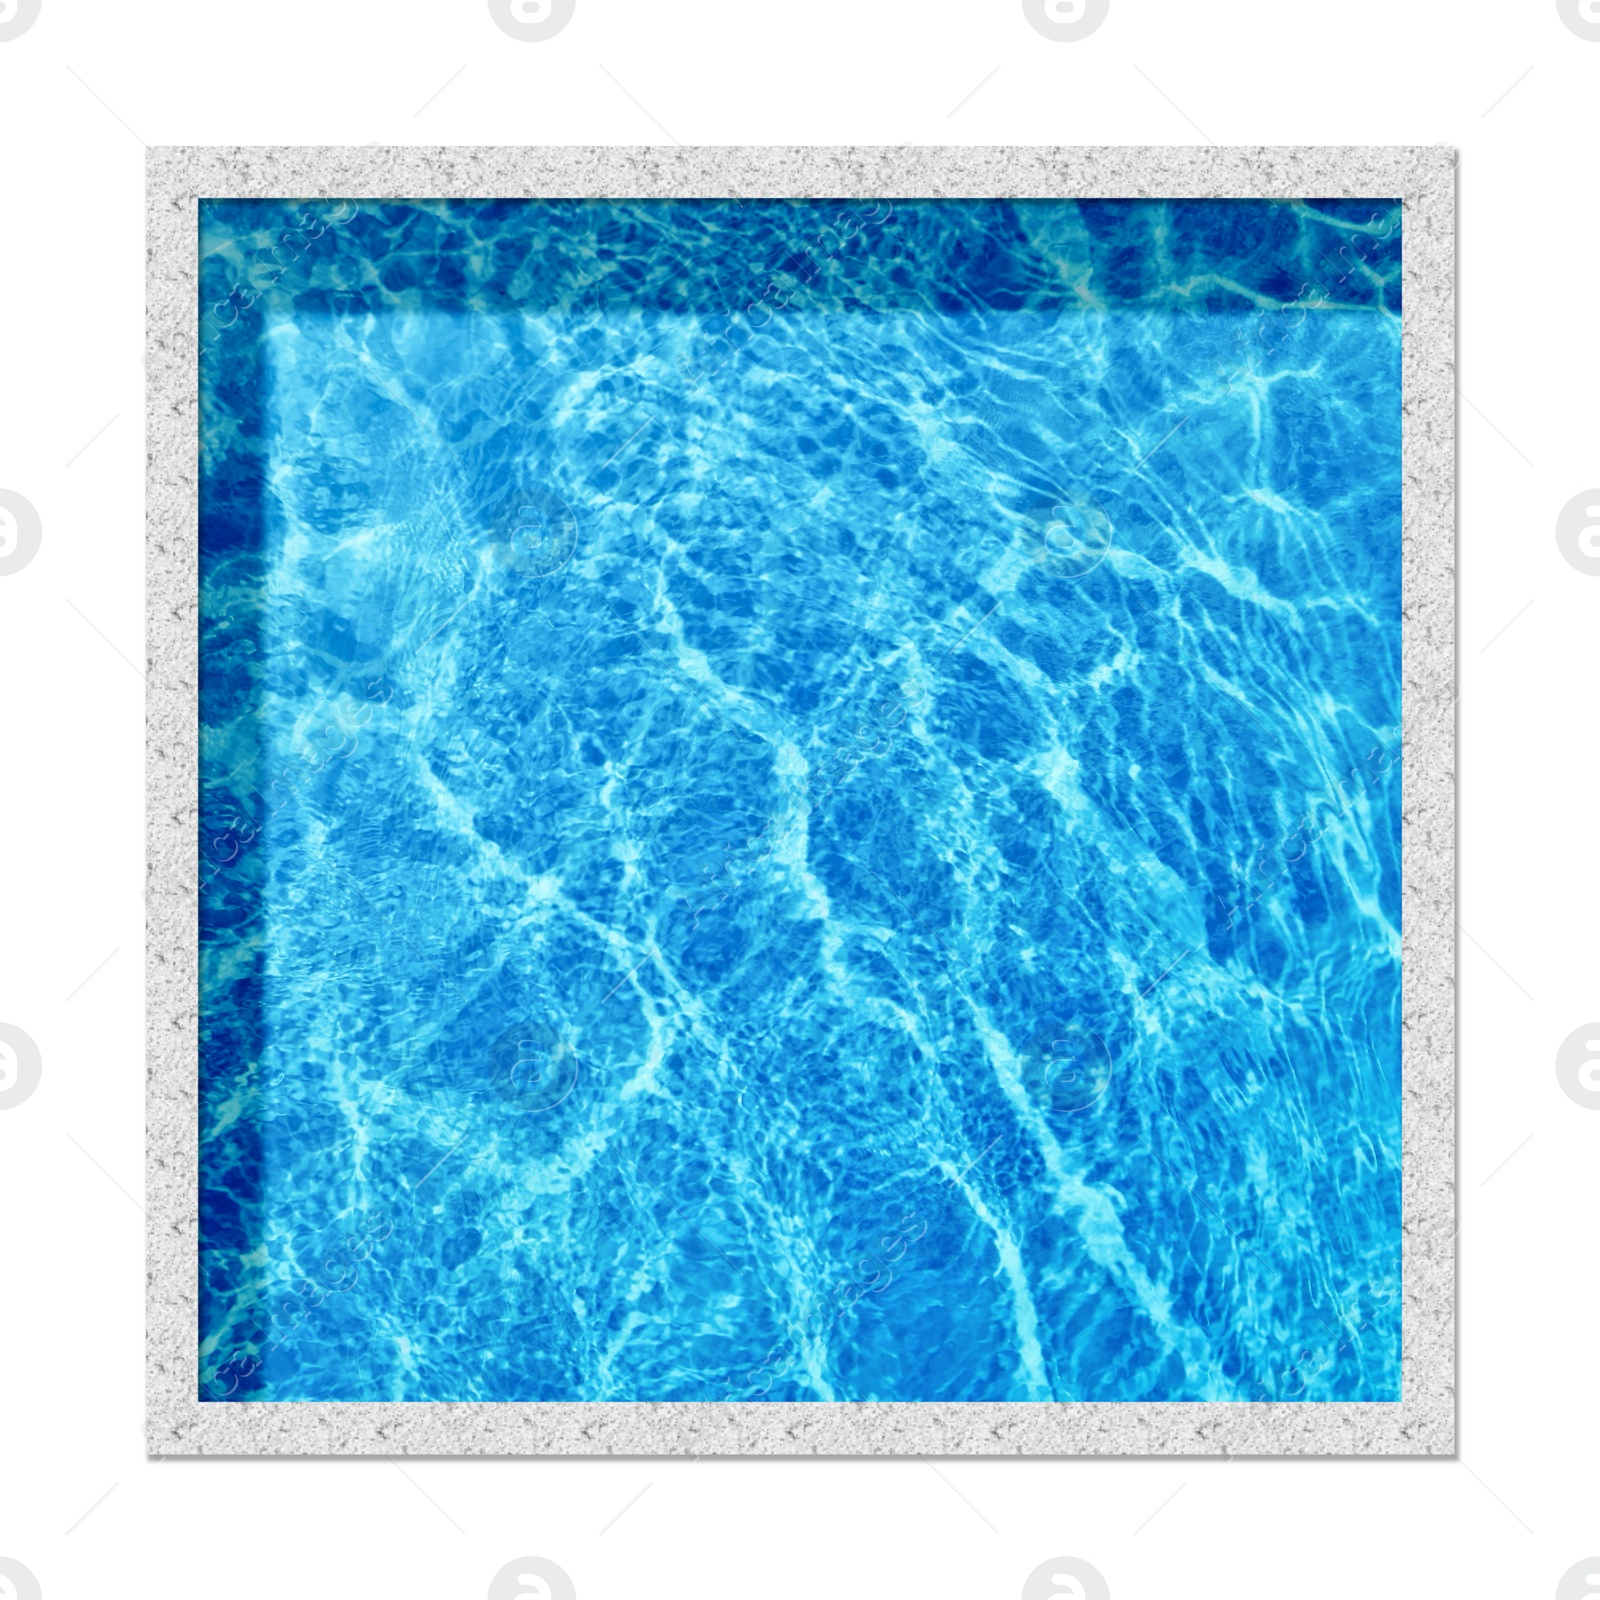 Image of Square shaped swimming pool on white background, top view